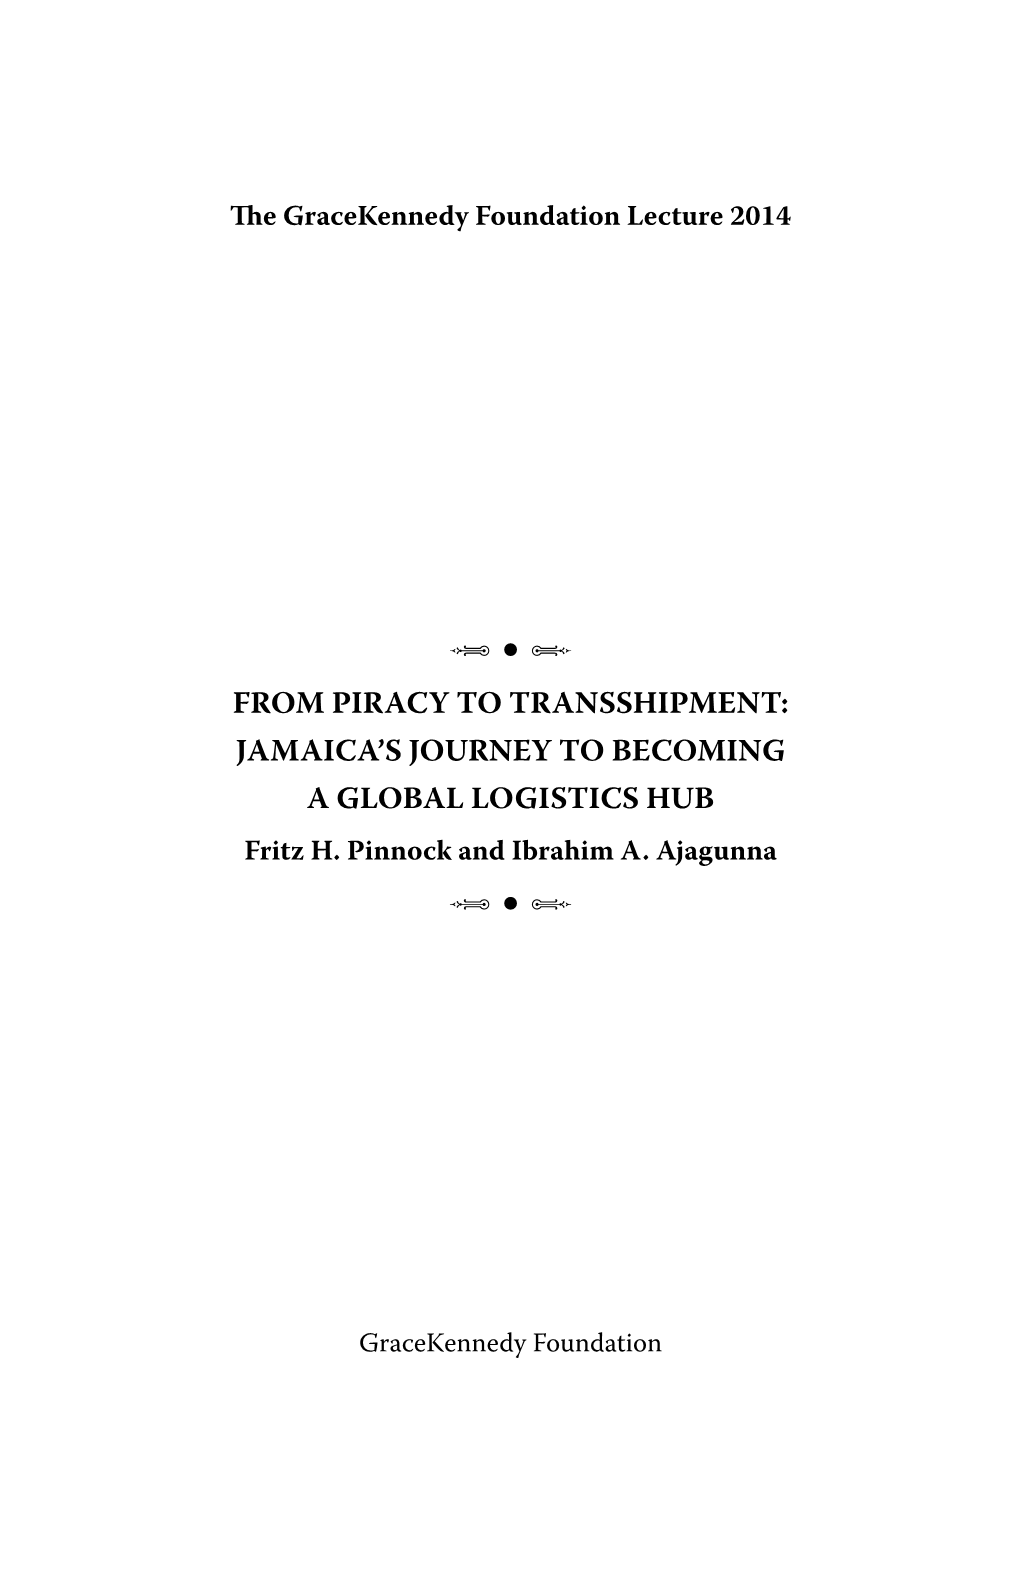 Jamaica's Journey to Becoming a Global Logistics